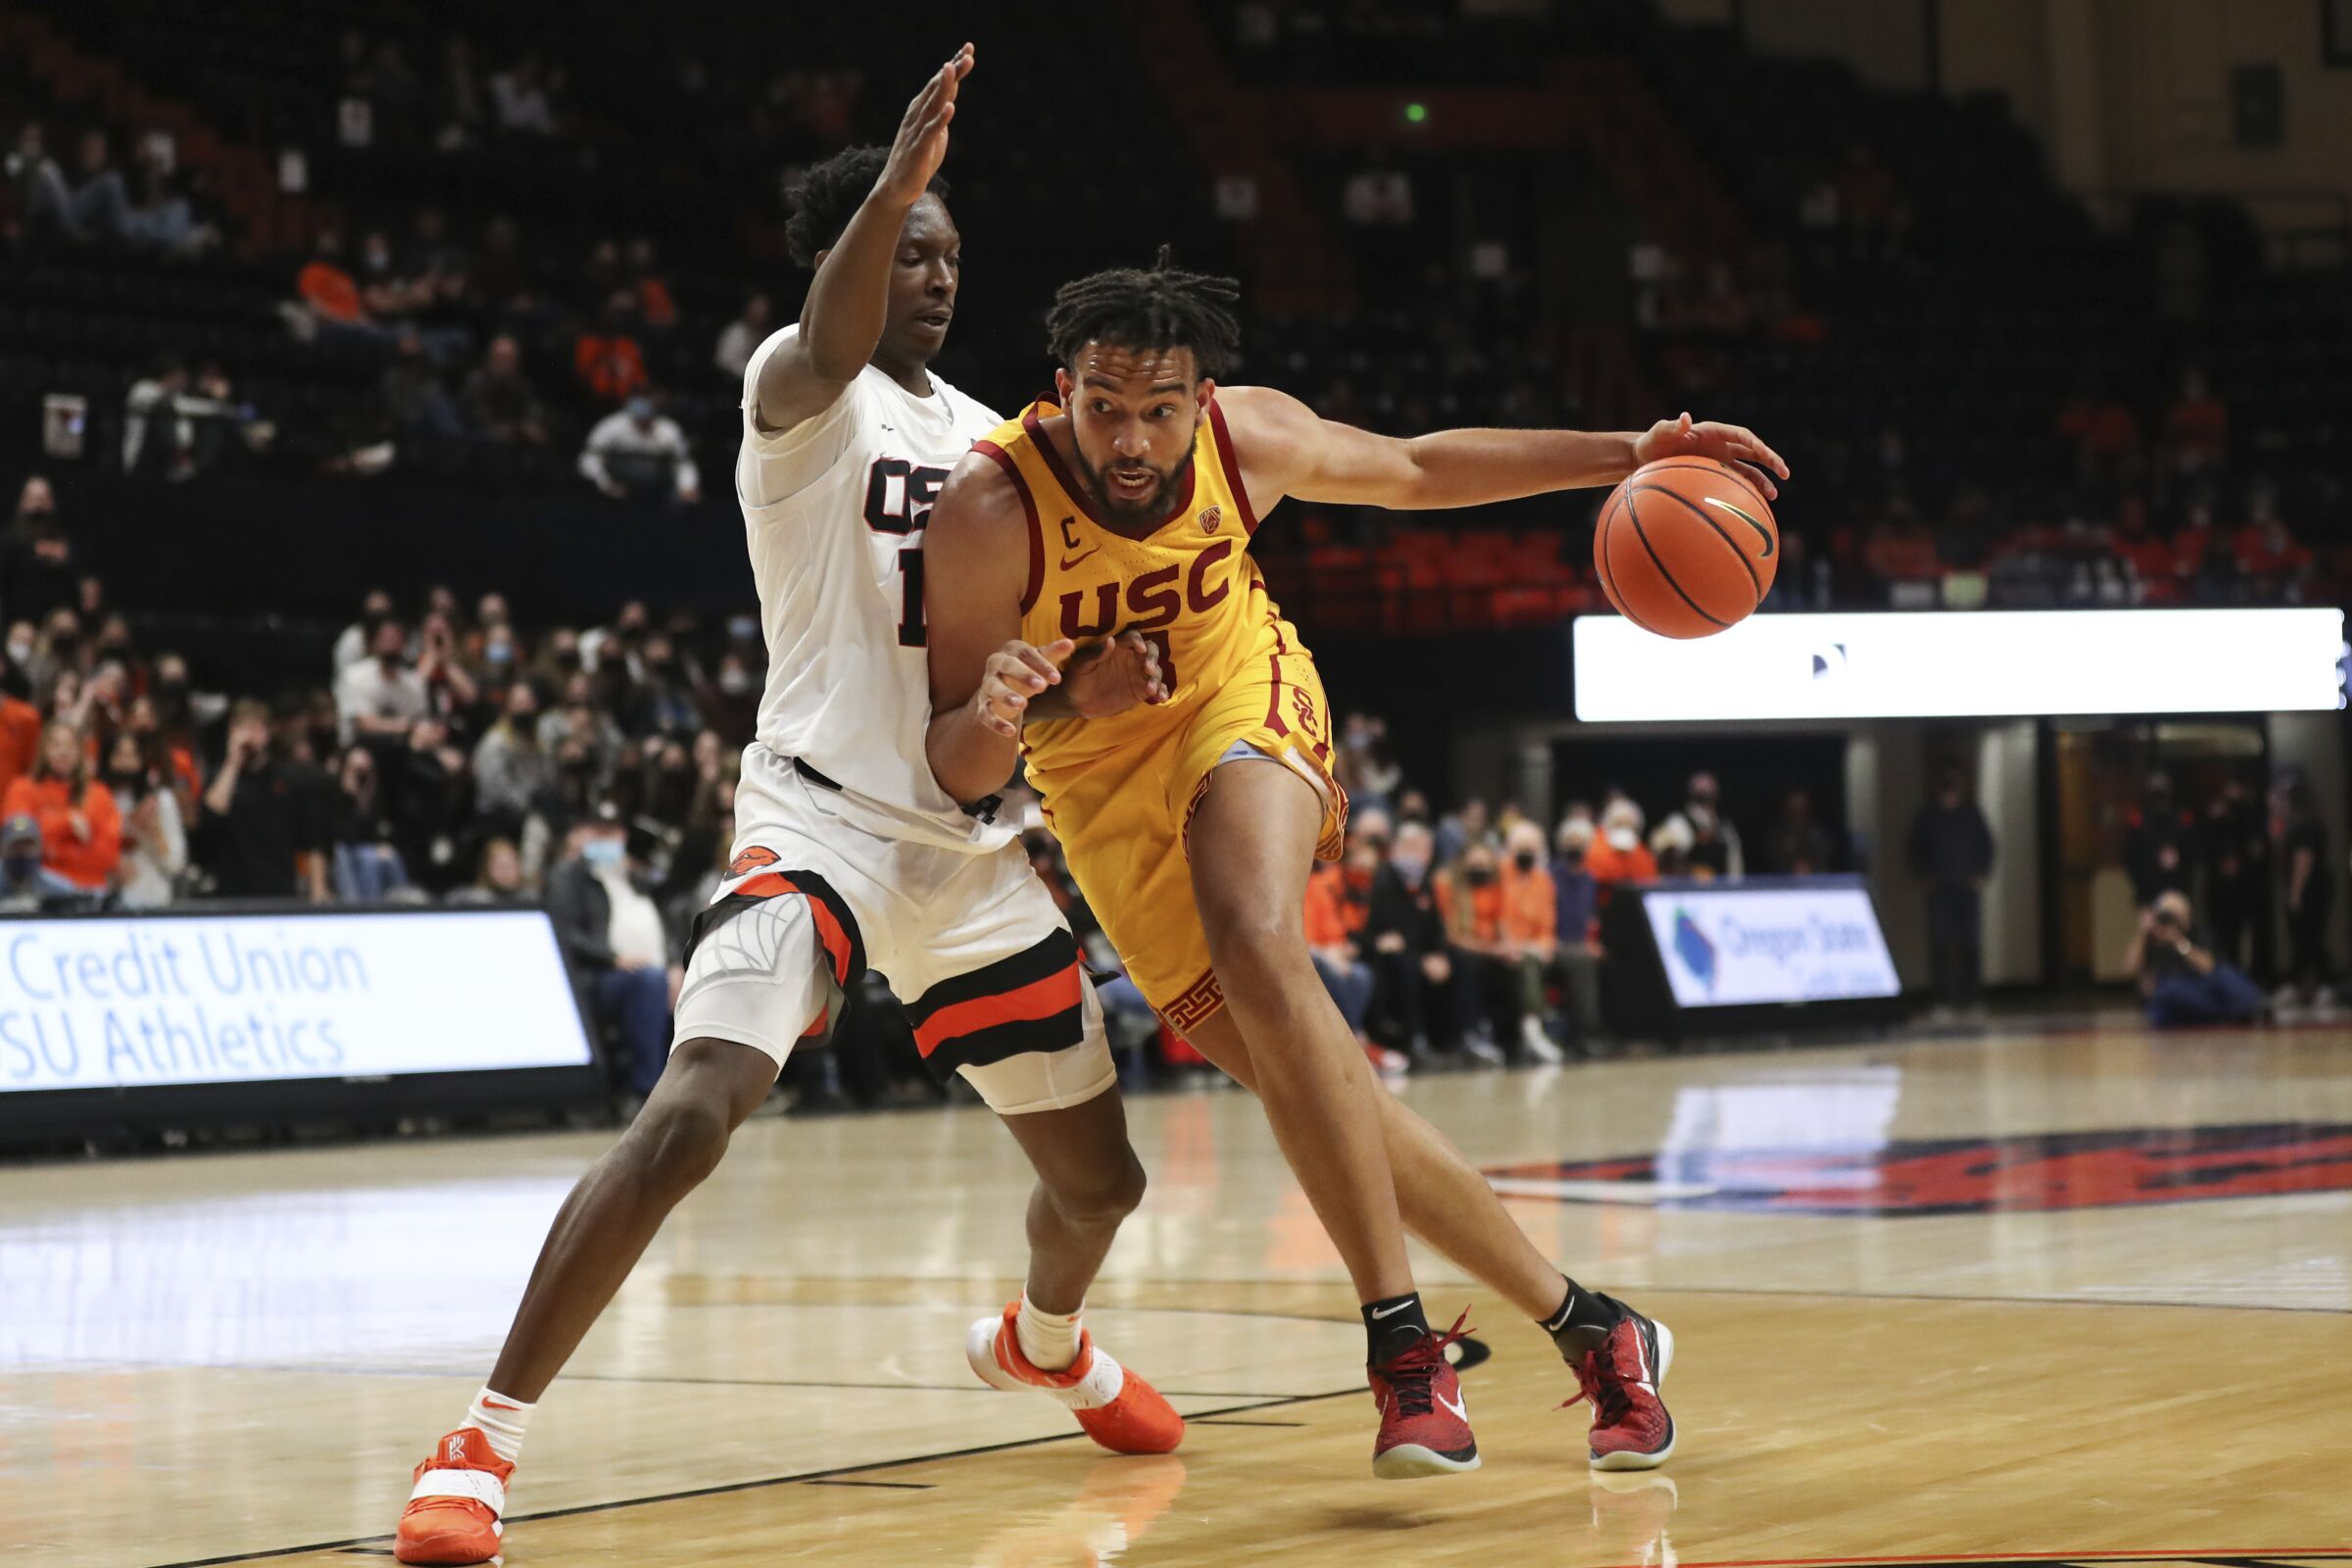 USC forward Isaiah Mobley drives to the basket in front of Oregon State forward Warith Alatishe.